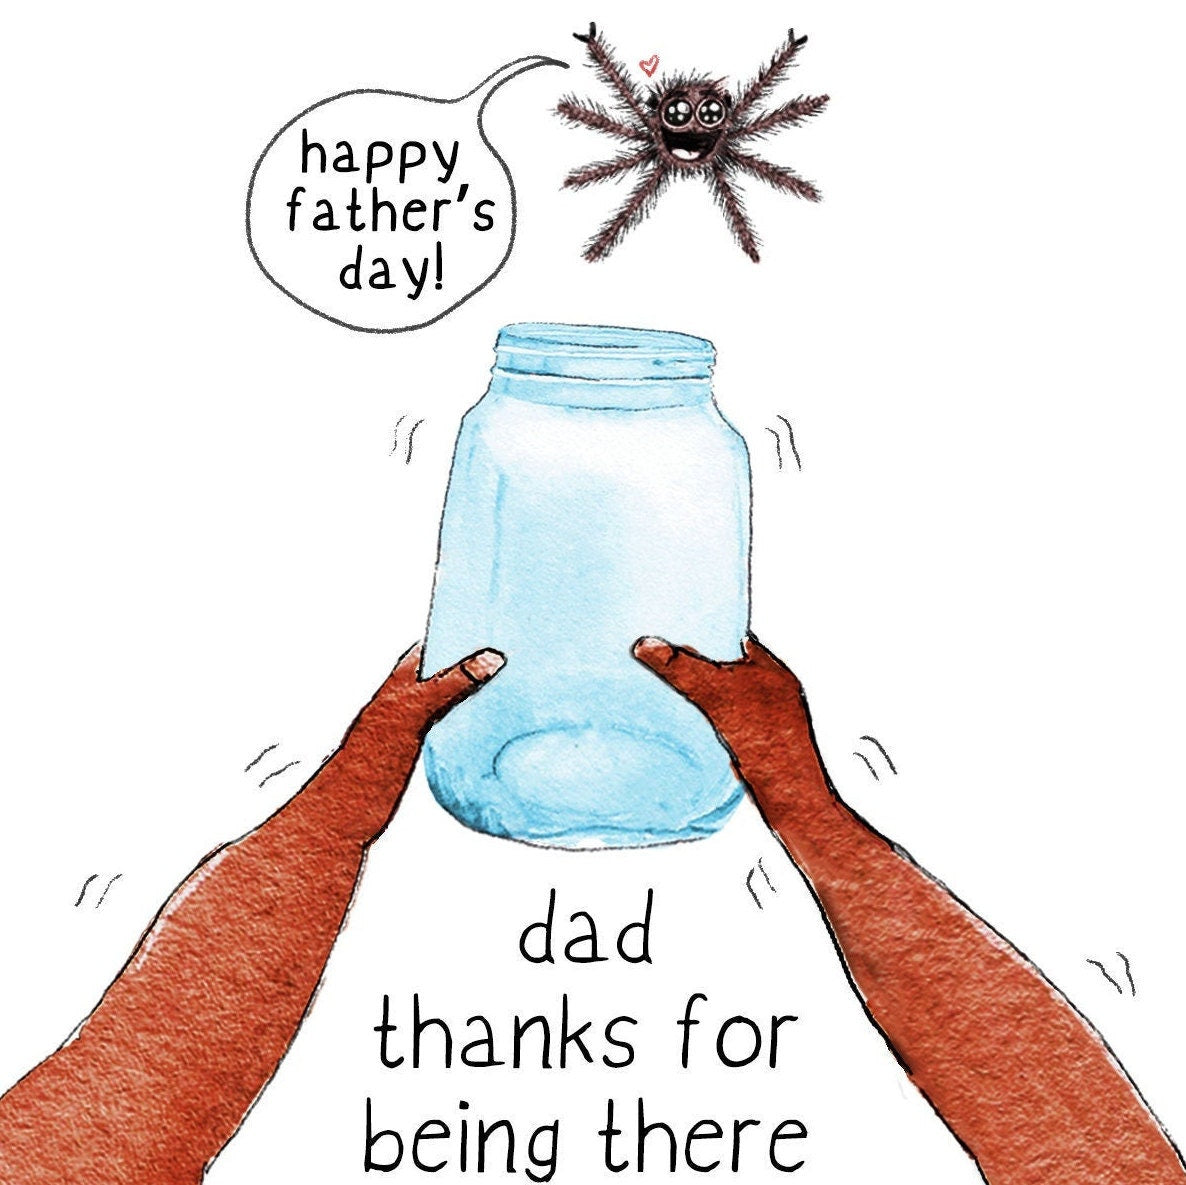 Childrens Drawings Idea Design Concept Love Dad For Fathers Day Stock  Illustration - Download Image Now - iStock